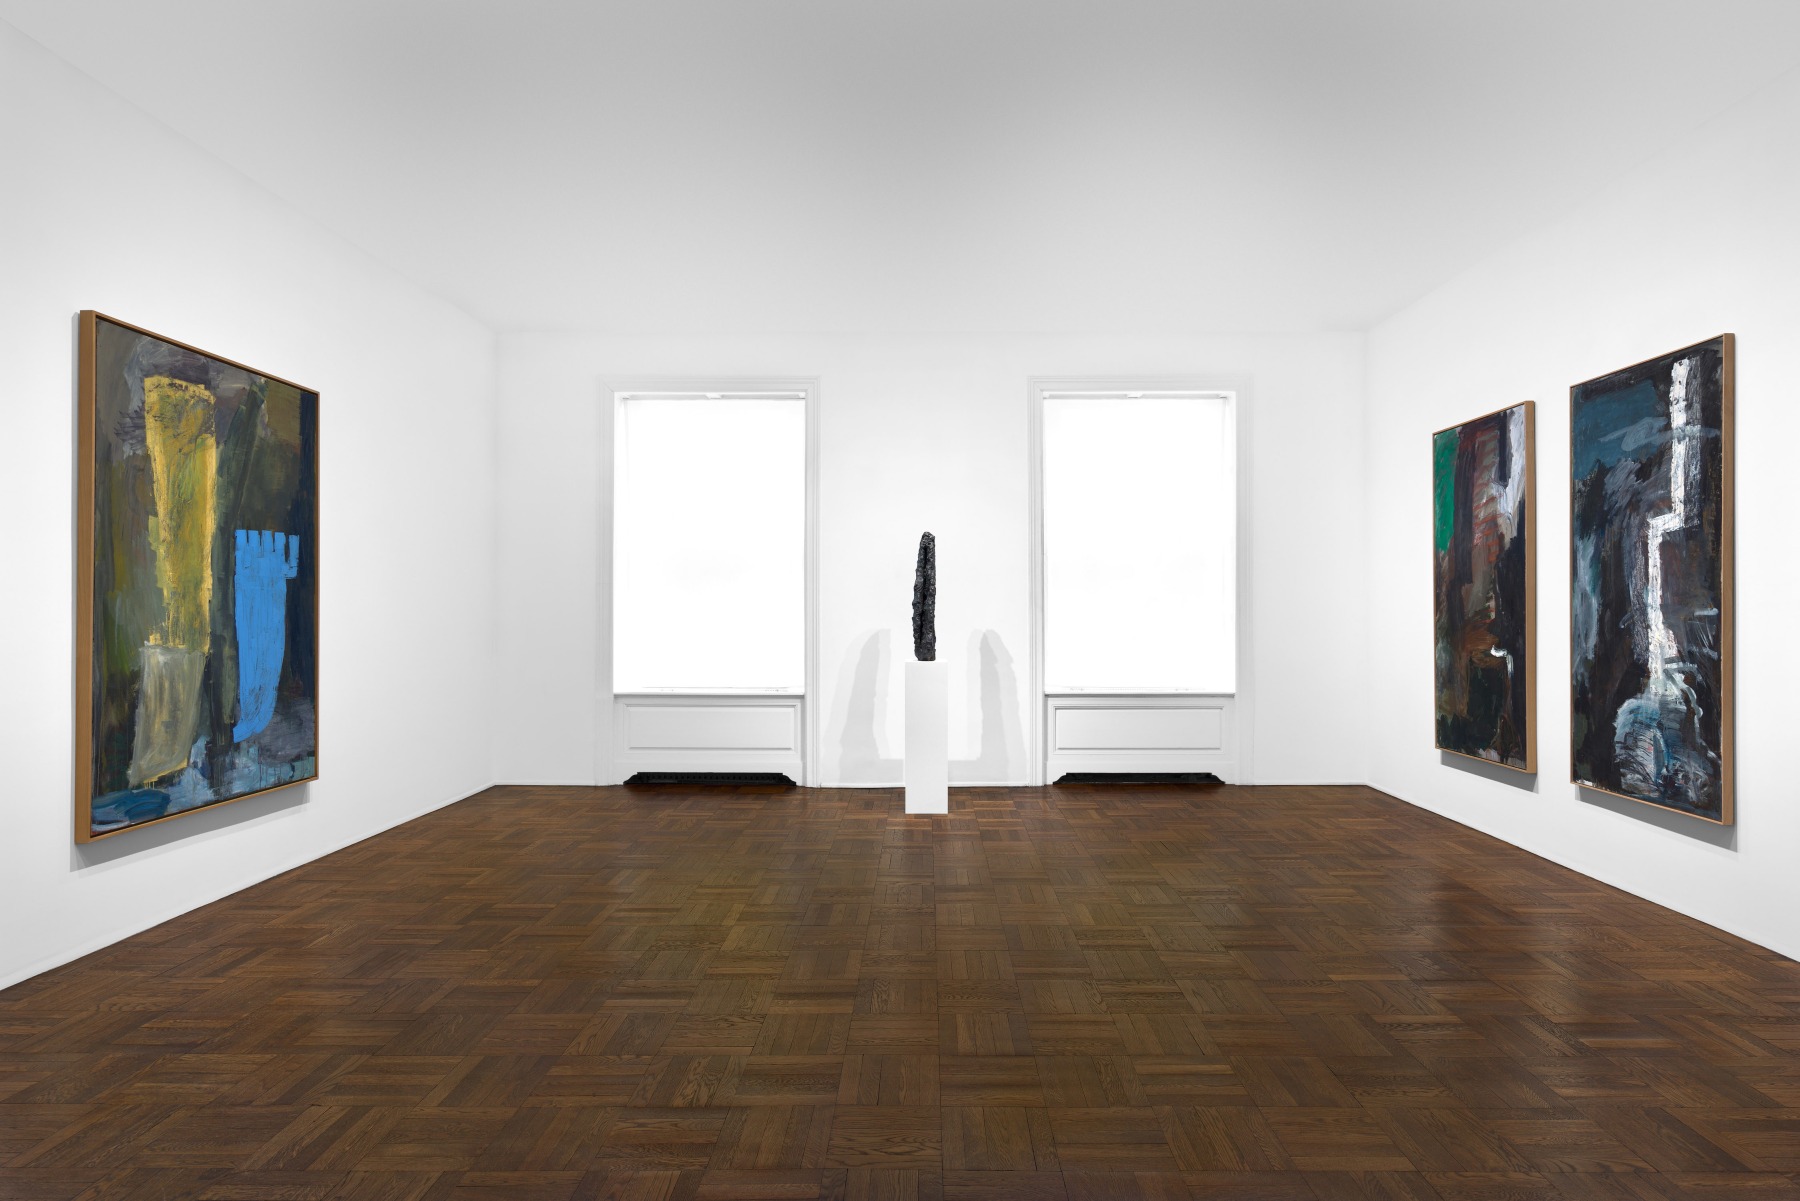 PER KIRKEBY, Paintings and Bronzes from the 1980s, New York, 2018, Installation Image 4